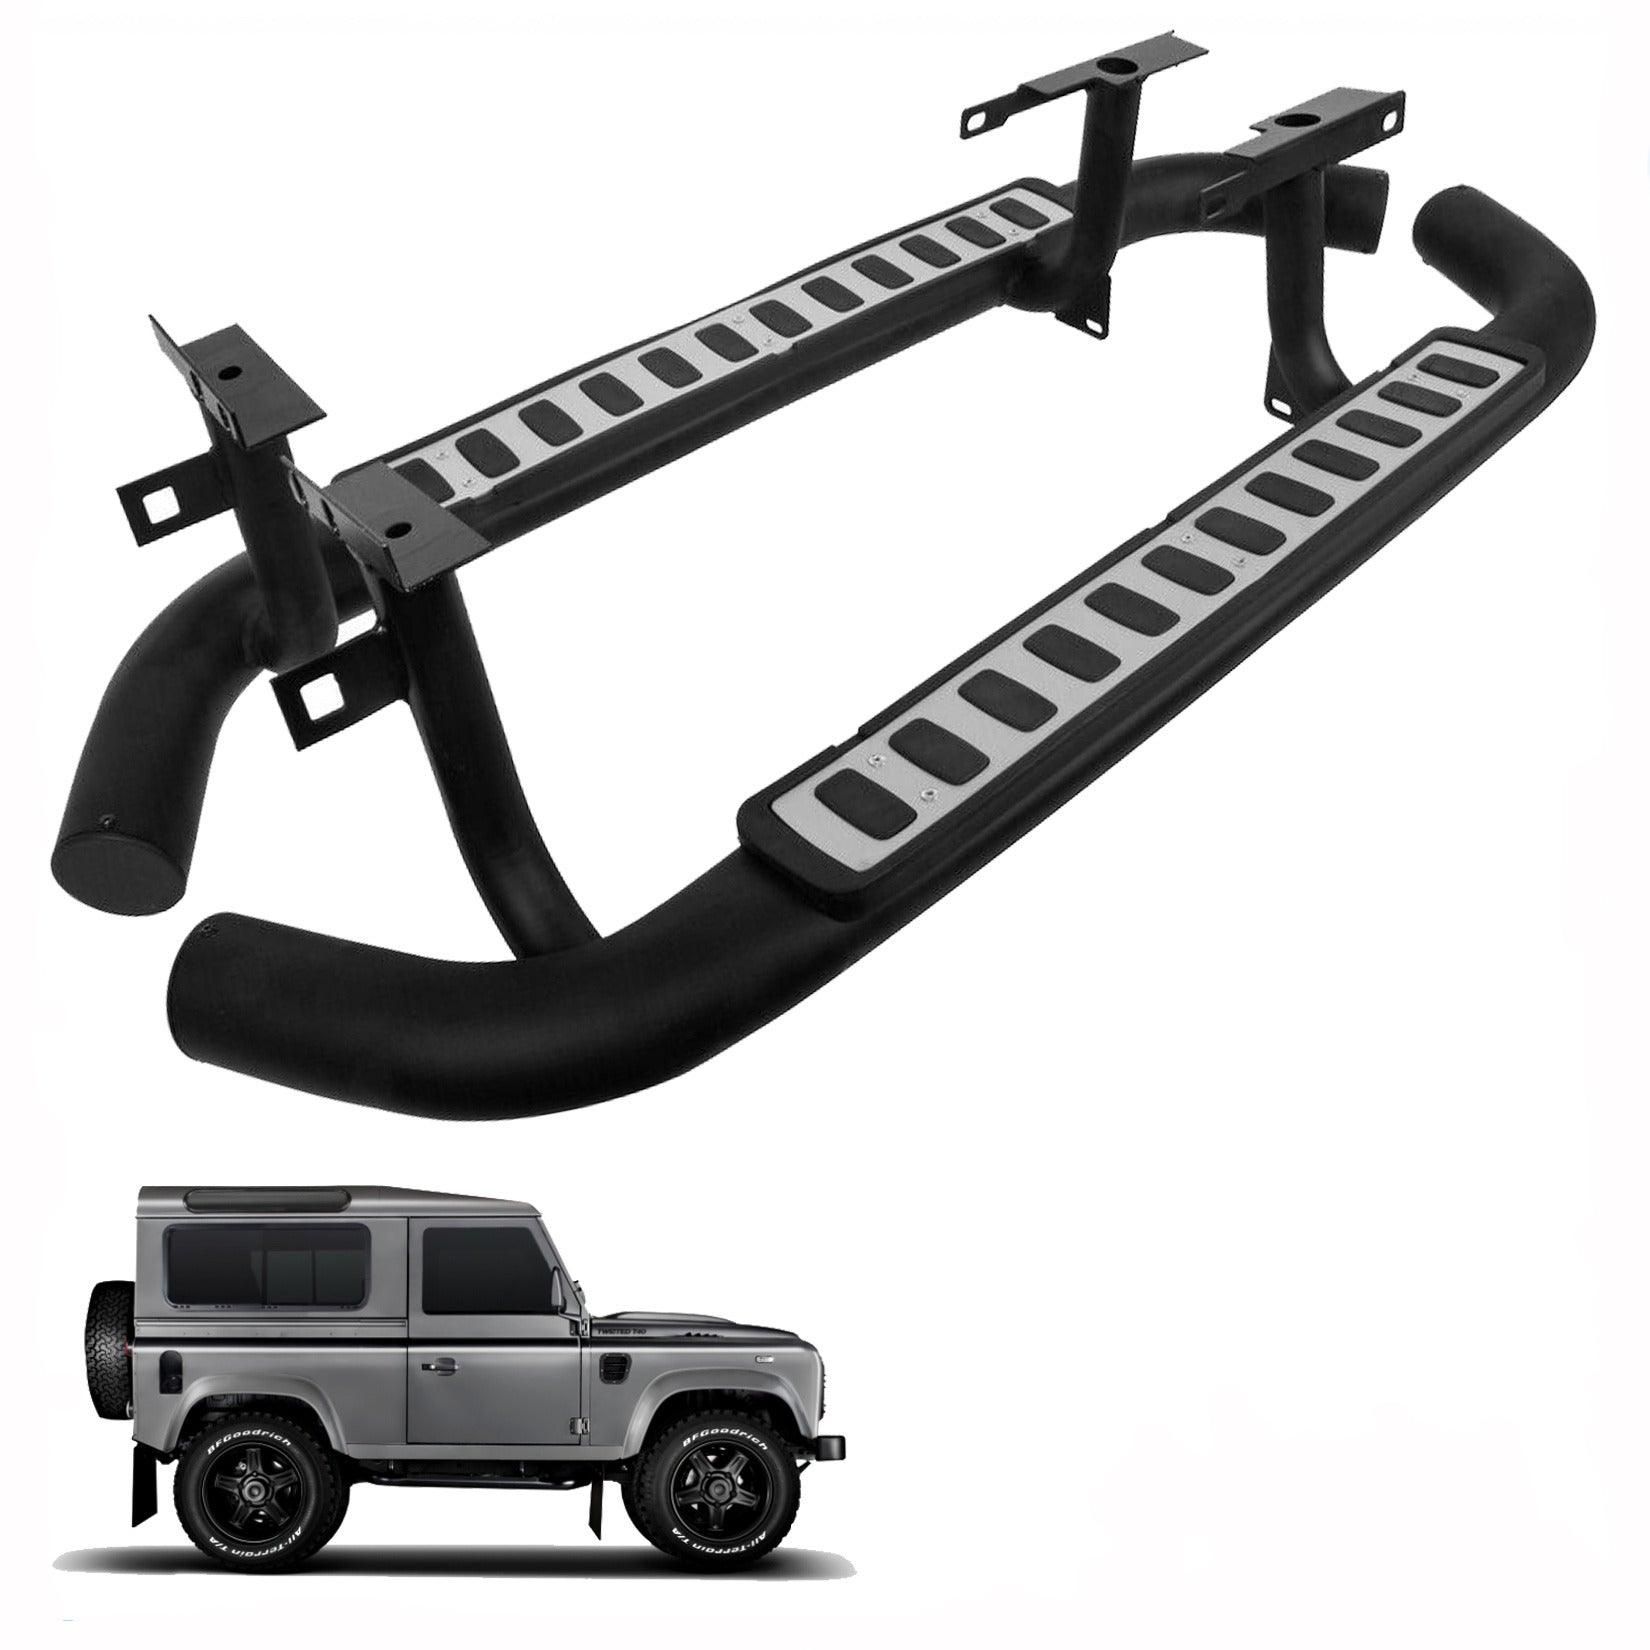 LAND ROVER DEFENDER 90 OEM STYLE RUNNING BOARDS - SIDE STEPS - PAIR - SILVER - Storm Xccessories2